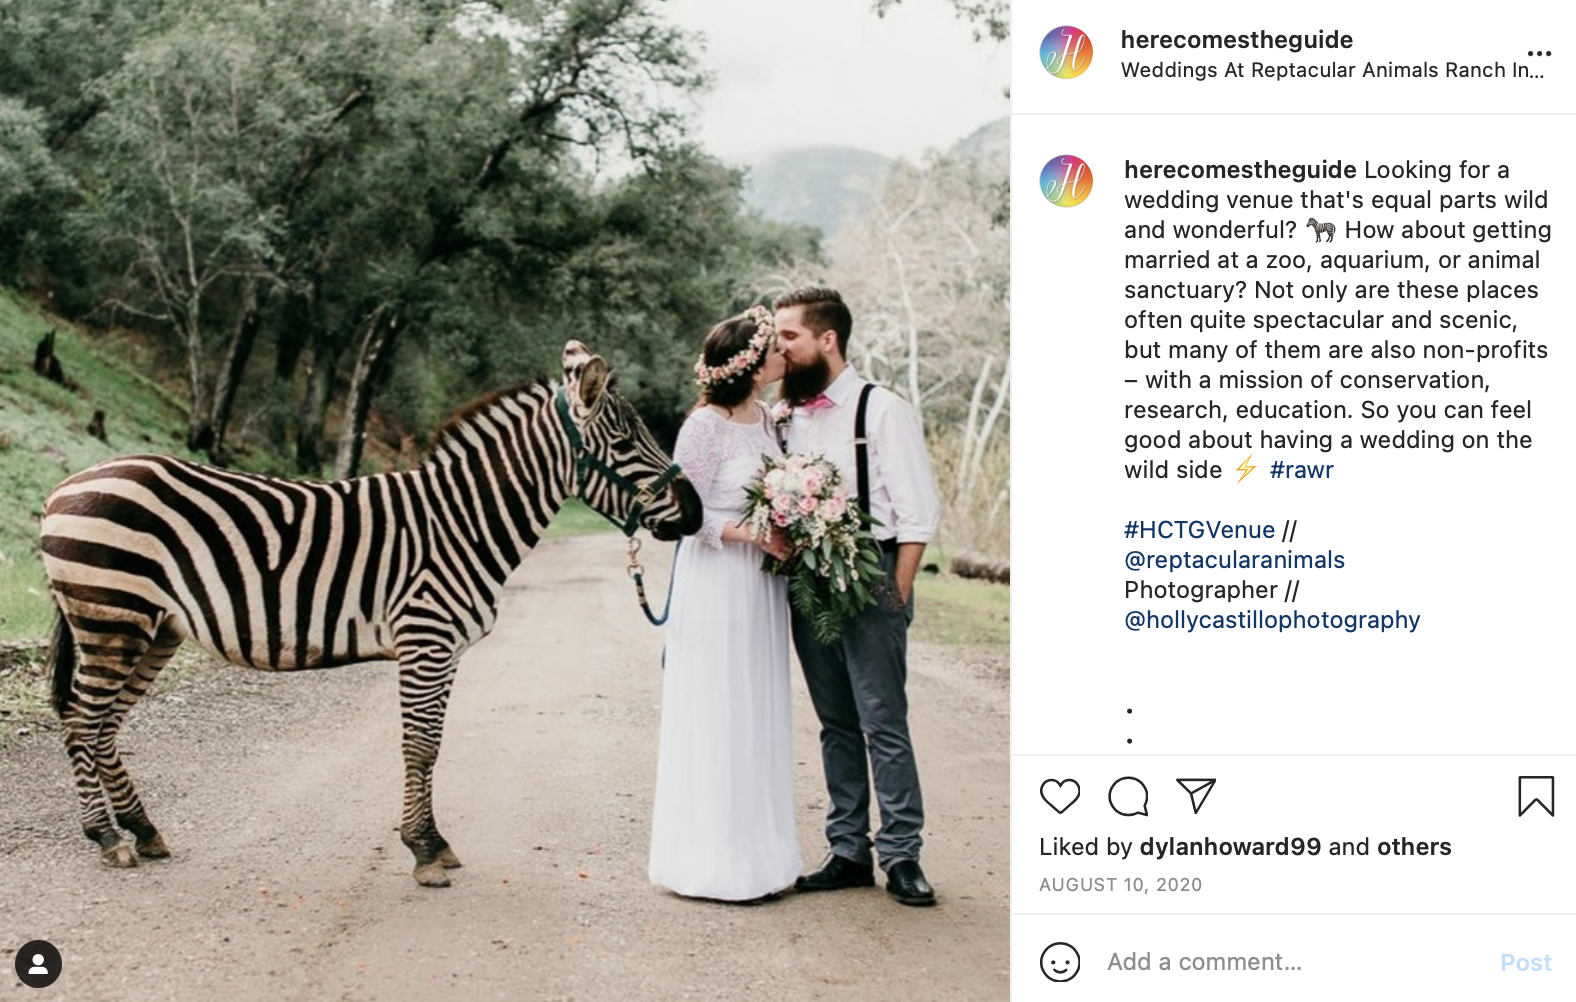 bride, groom, and zebra pose on a dirt road